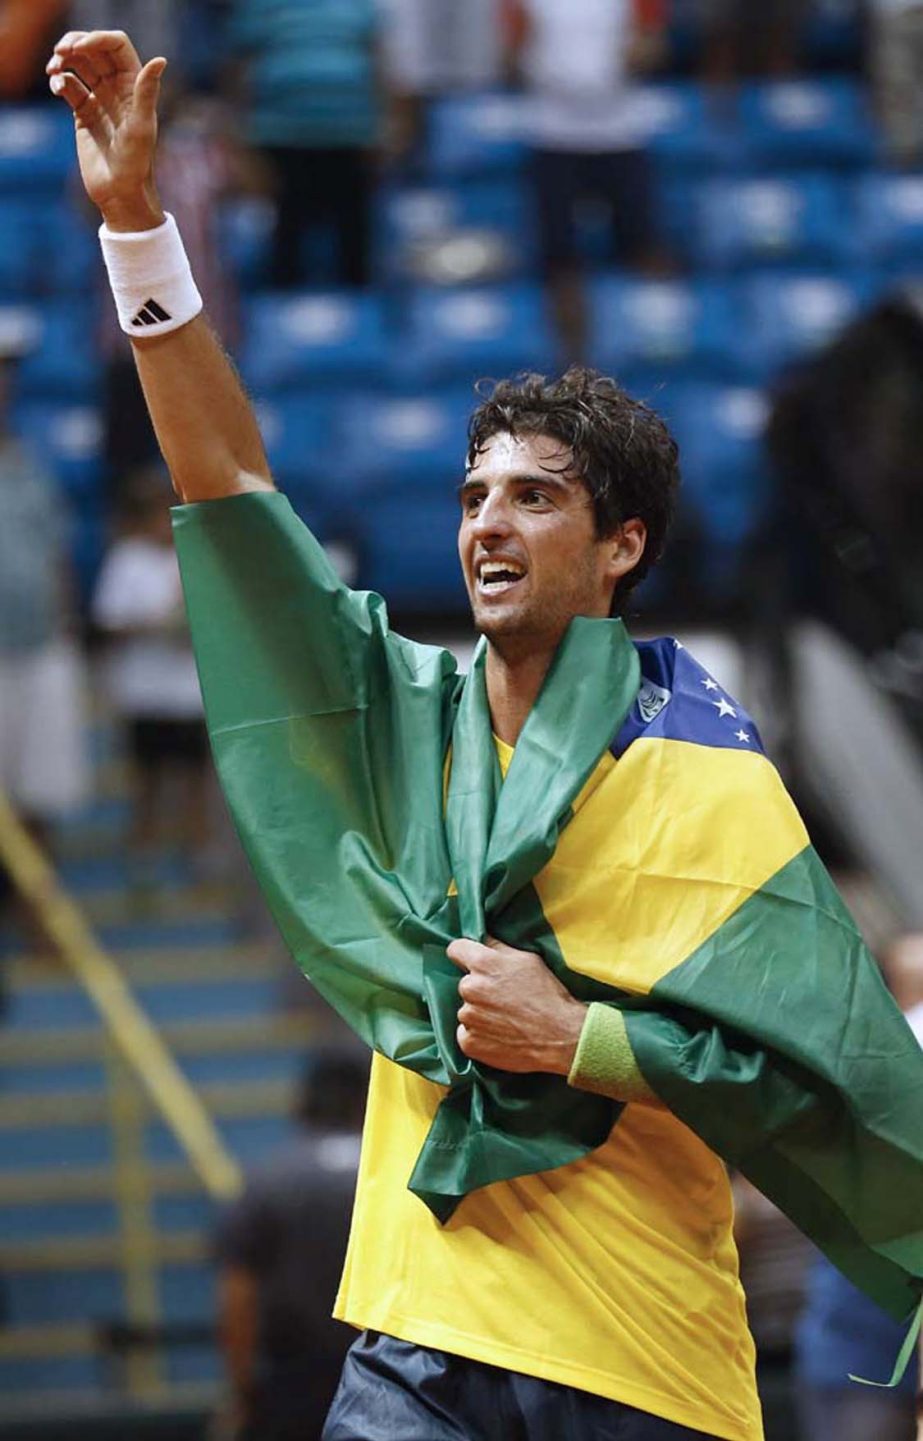 Thomaz Bellucci celebrates draped with the Brazilian flag after defeating Roberto Bautista Agut of Spain at the end of a singles tennis match of the Davis Cup World Group play-off in Sao Paulo, Brazil on Sunday. Brazil defeated the Spanish team 3-1 and ad